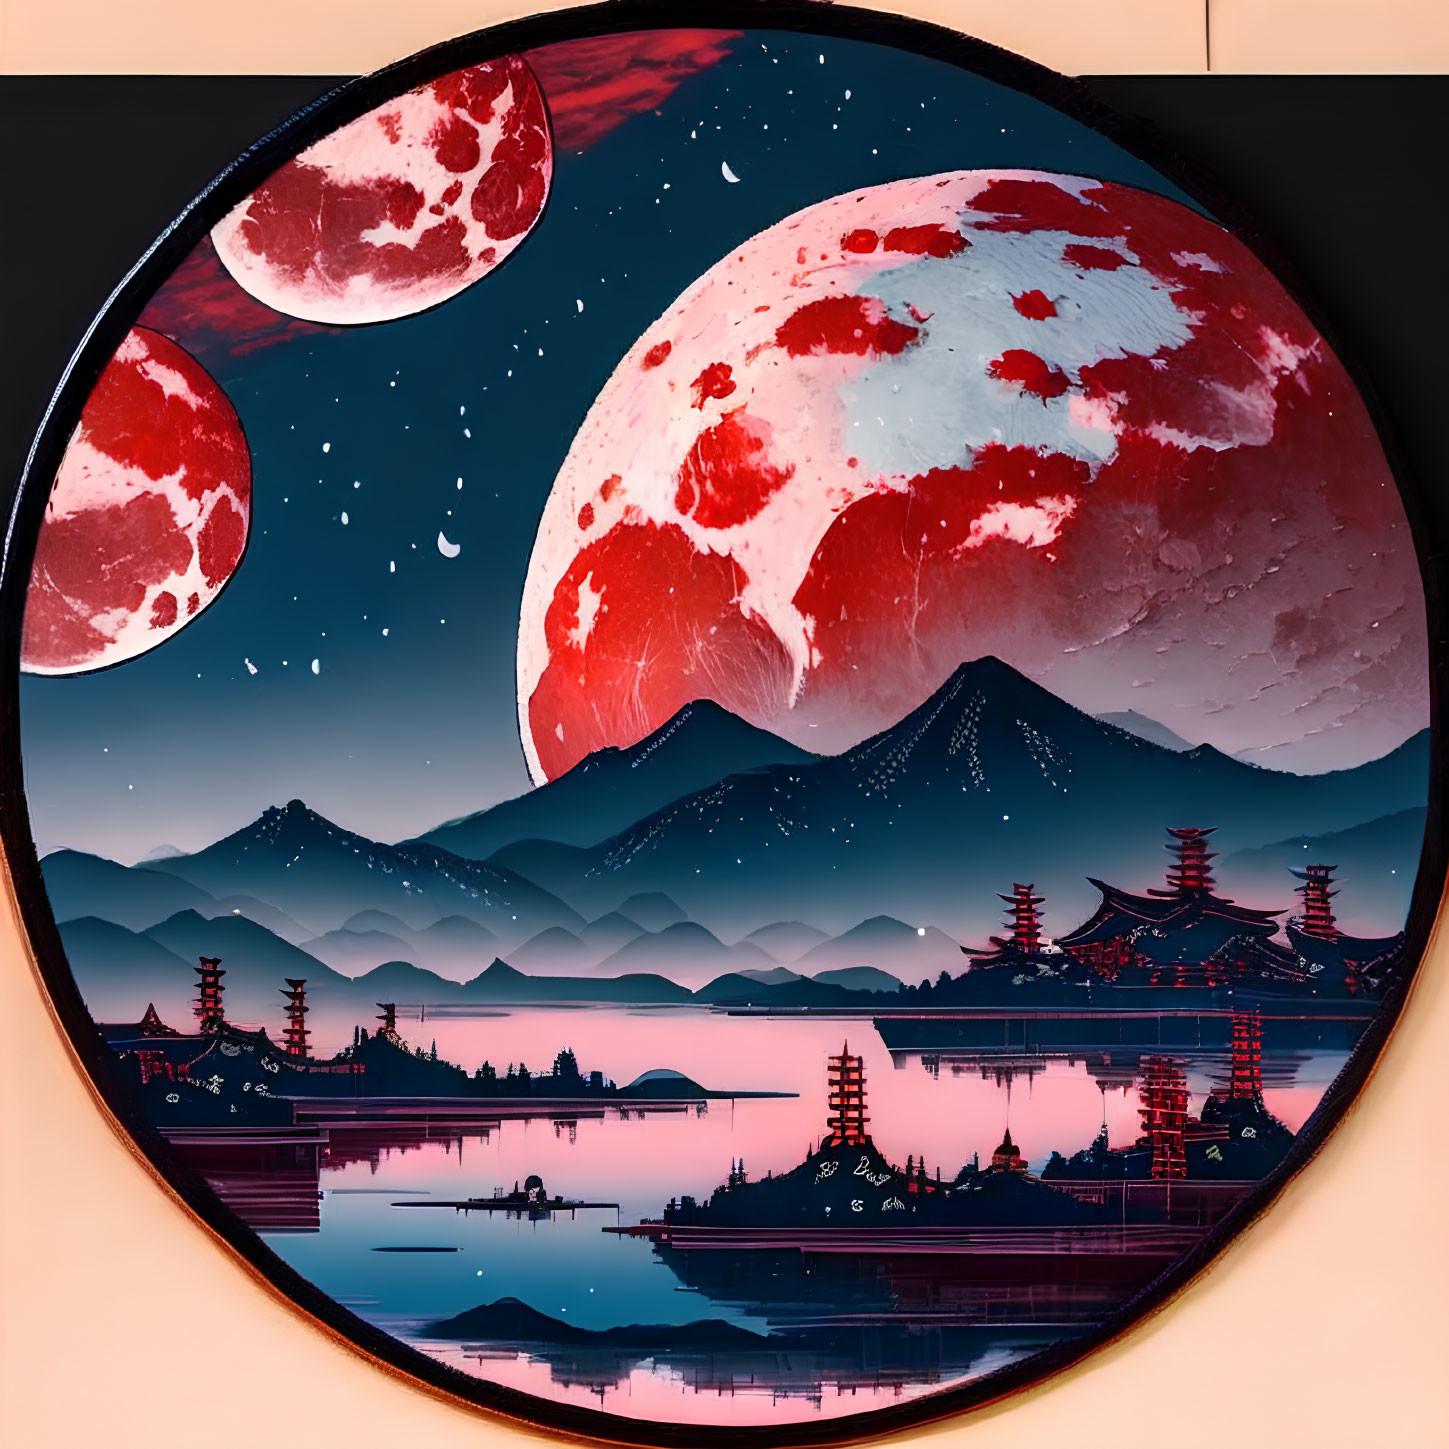 Vibrant red and purple landscape with moons, mountains, pagodas, and water under star